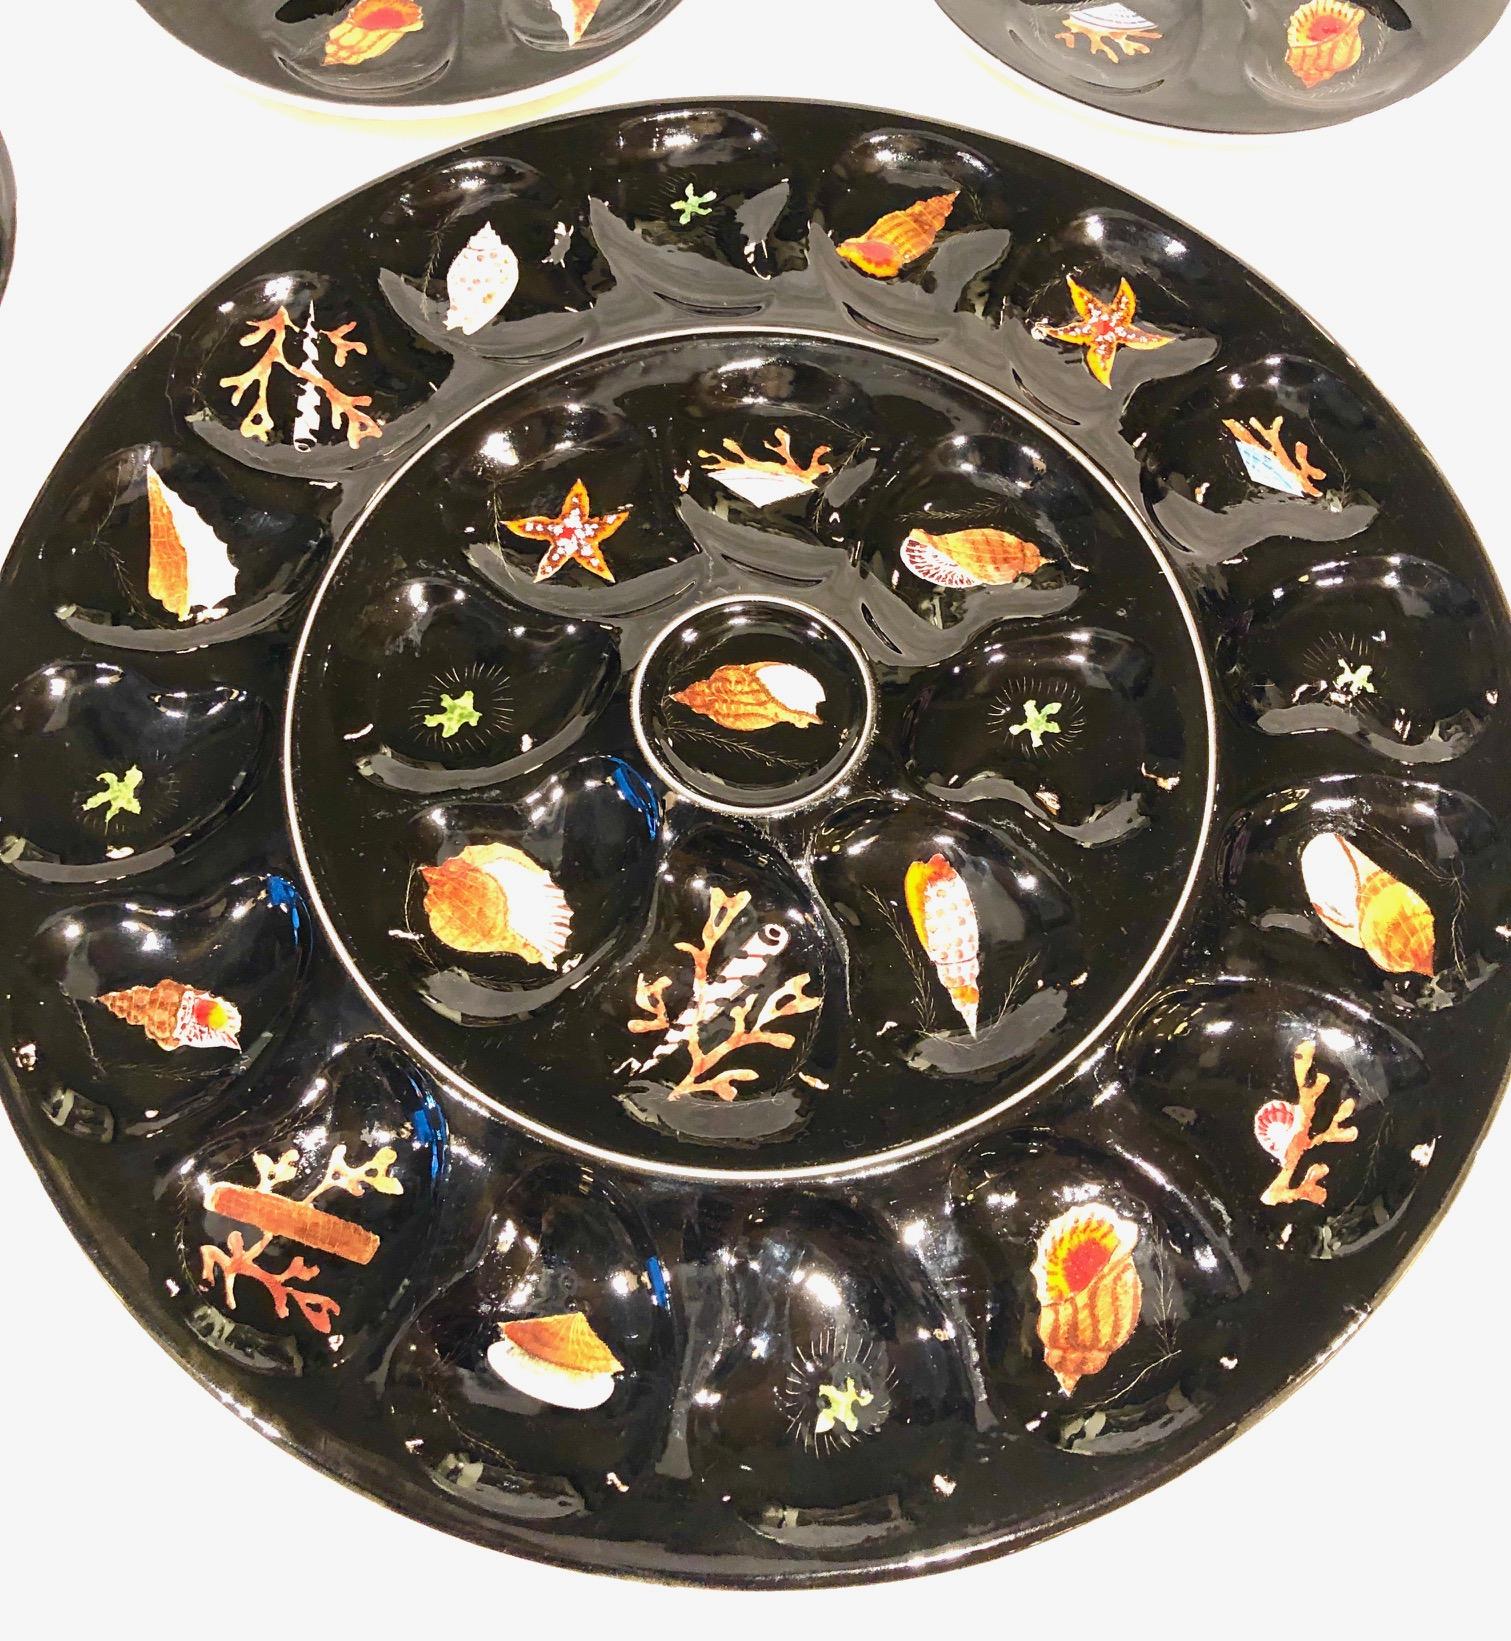 French midcentury oyster serving platter with 8 matching dishes. By French artist Guy Trevoux in the Henriot Quimper factory in the 1950s-1960s
The hand painted decor depicts shell and sea life on a black background. In very good condition.
All